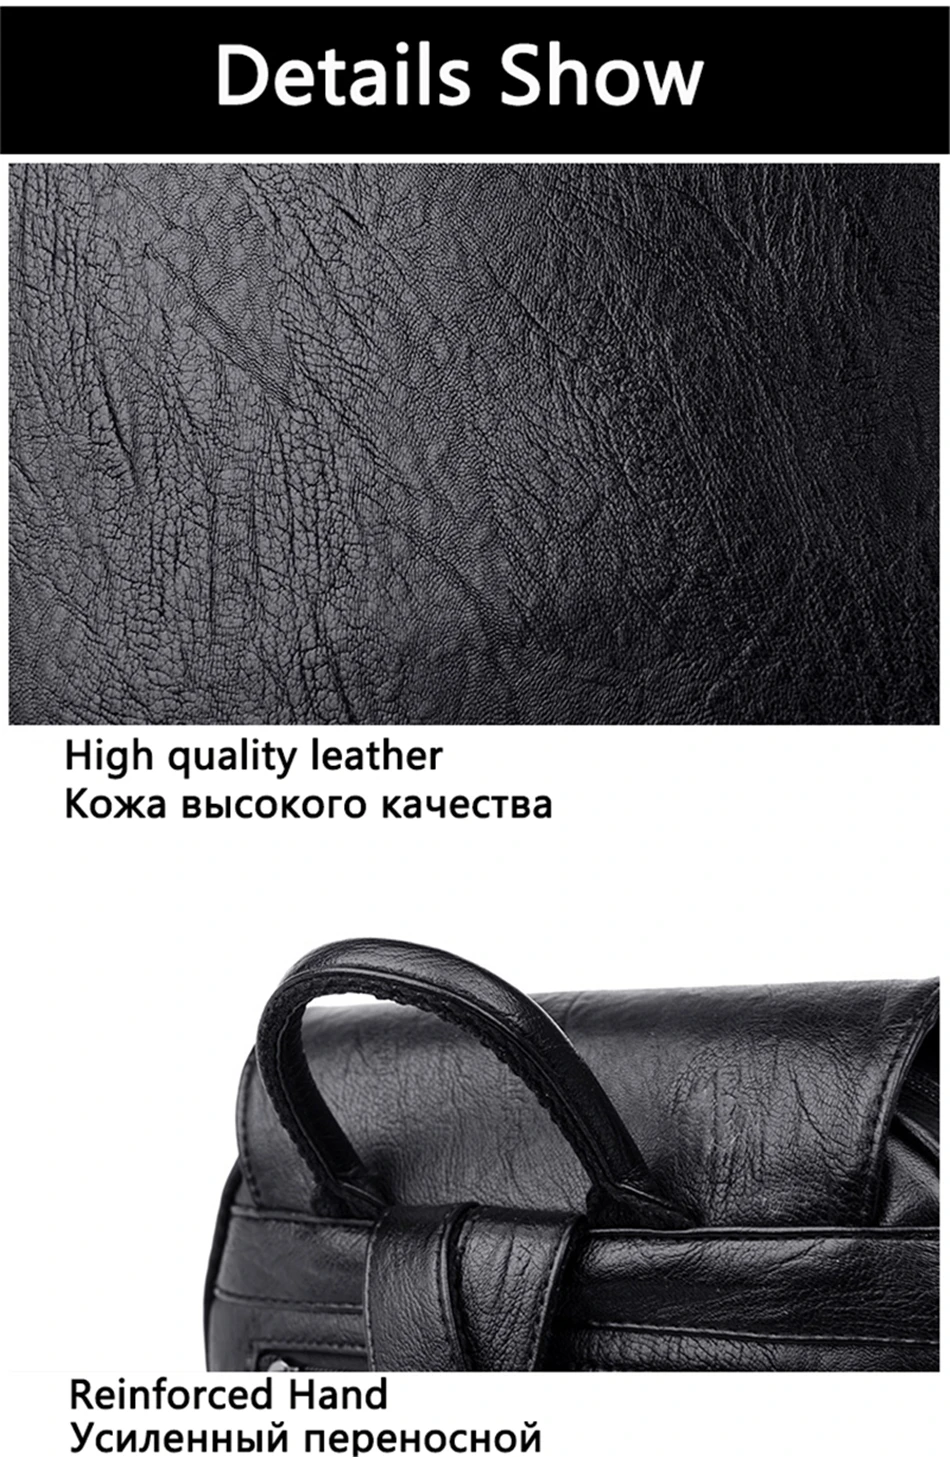 Women Fashion Backpack 2021 New High Quality Soft Leather Bagpack Travel Large Capacity School Bags for Teenage Girls Rucksack